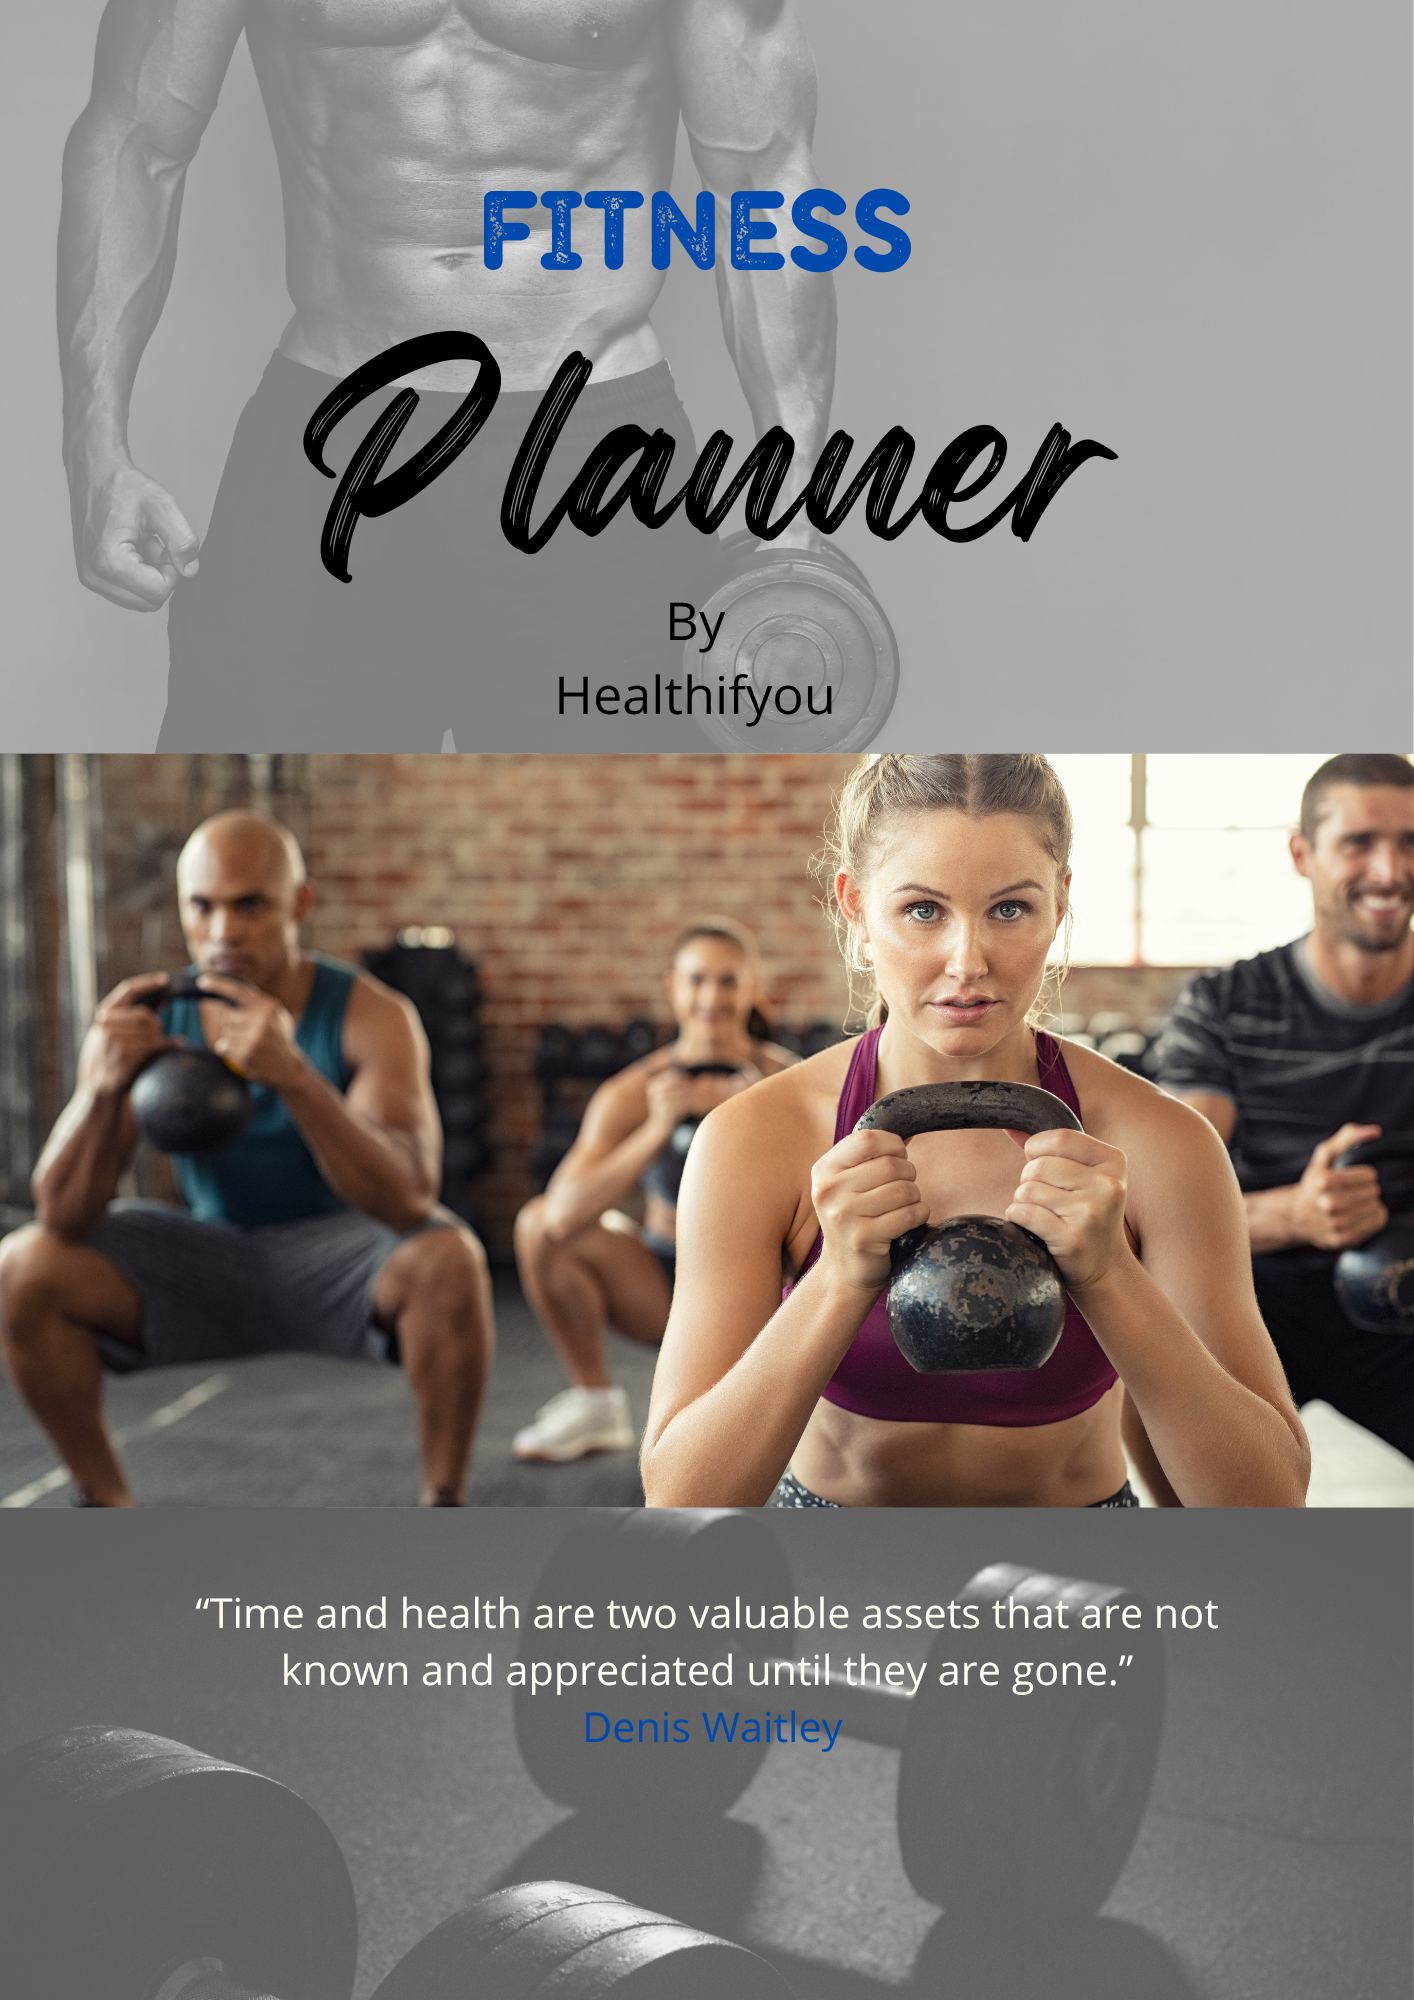 Fitness Planner by Healthifyou